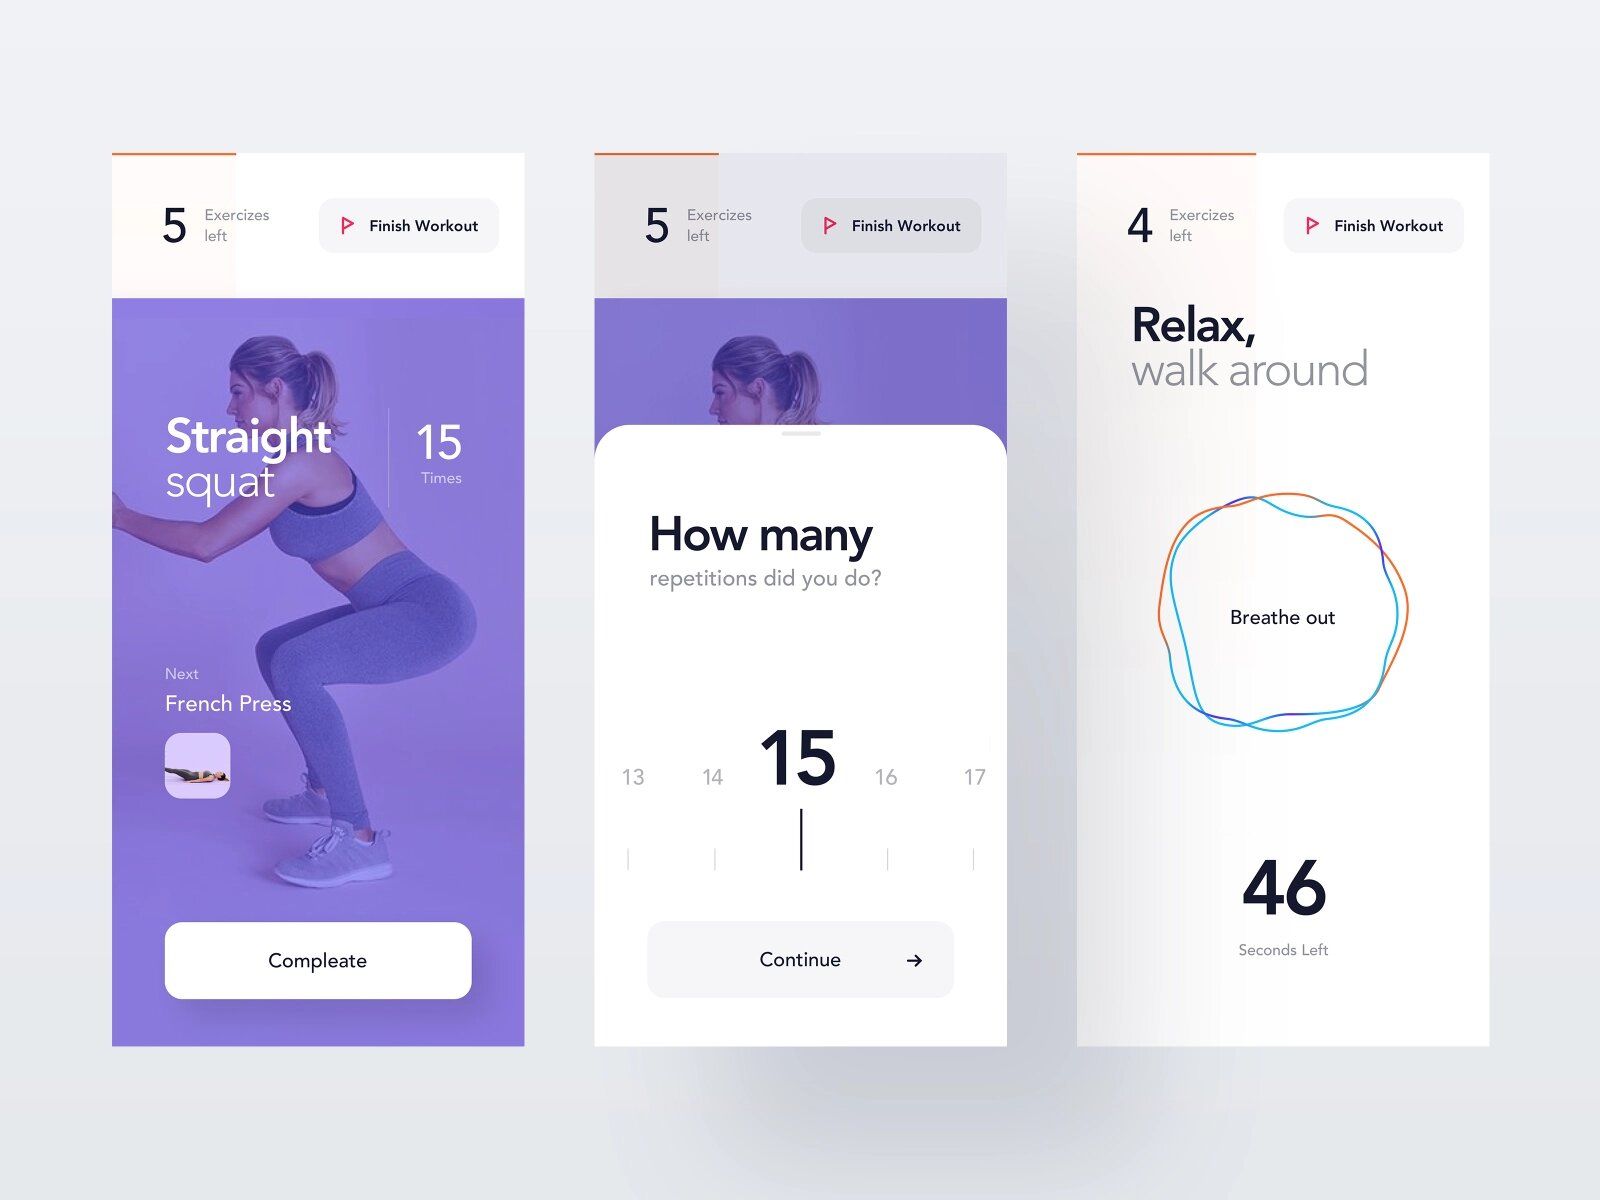 Fitness IoT units like fitness bands with wireless sensors allow tracking fitness data like a user’s heart rate (*image by [Den Klenkov](https://dribbble.com/denklenkov){ rel="nofollow" target="_blank" .default-md}*)